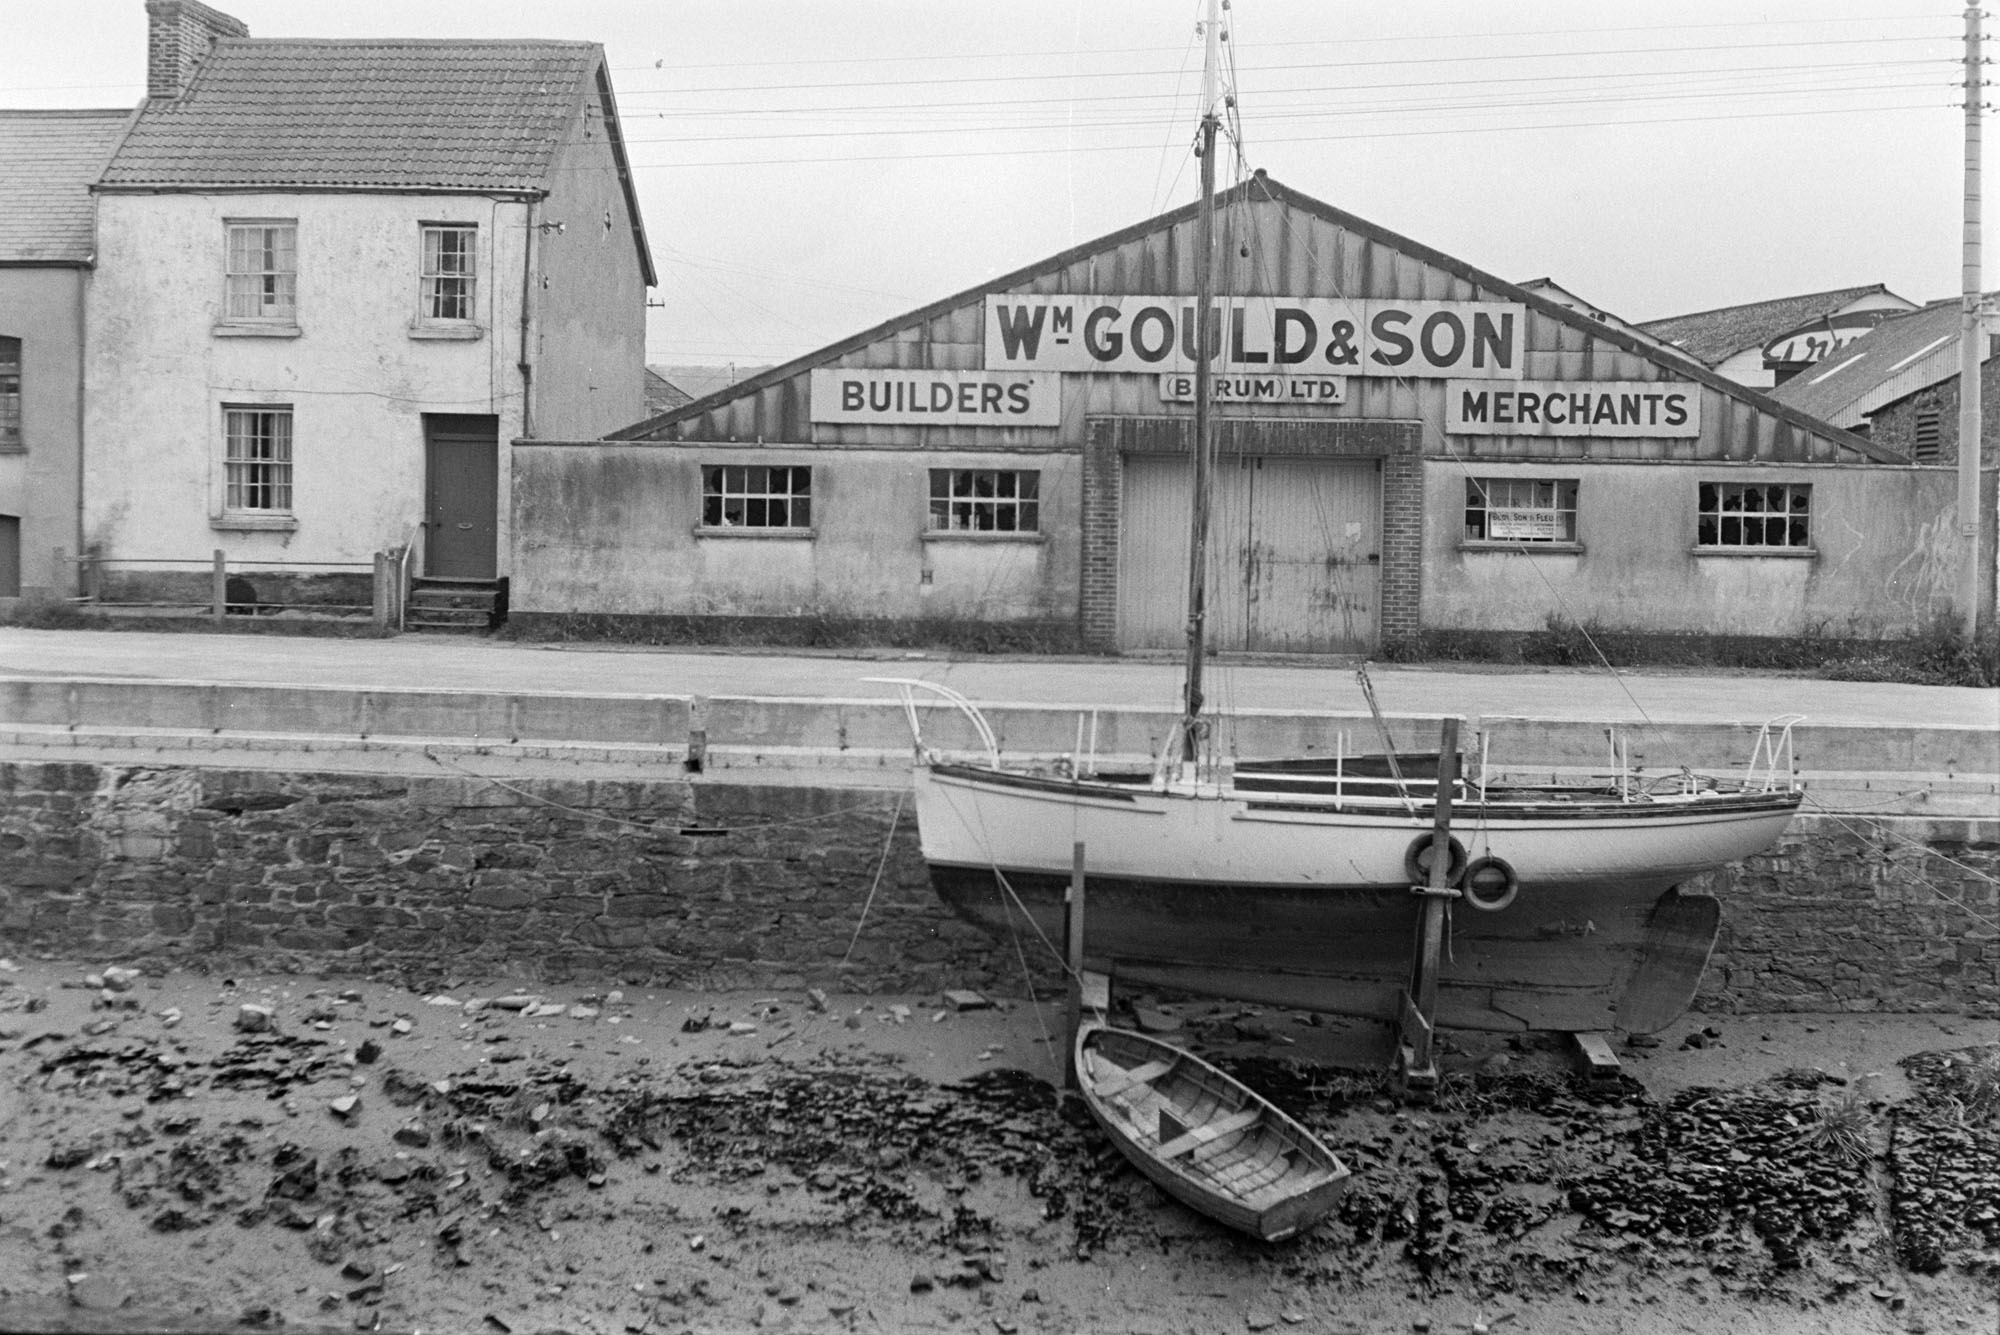 William Gould & Son Builders Merchants premises on the banks of the River Taw at Barnstaple. A moored boat and rowing boat are on the mud flats of the river.